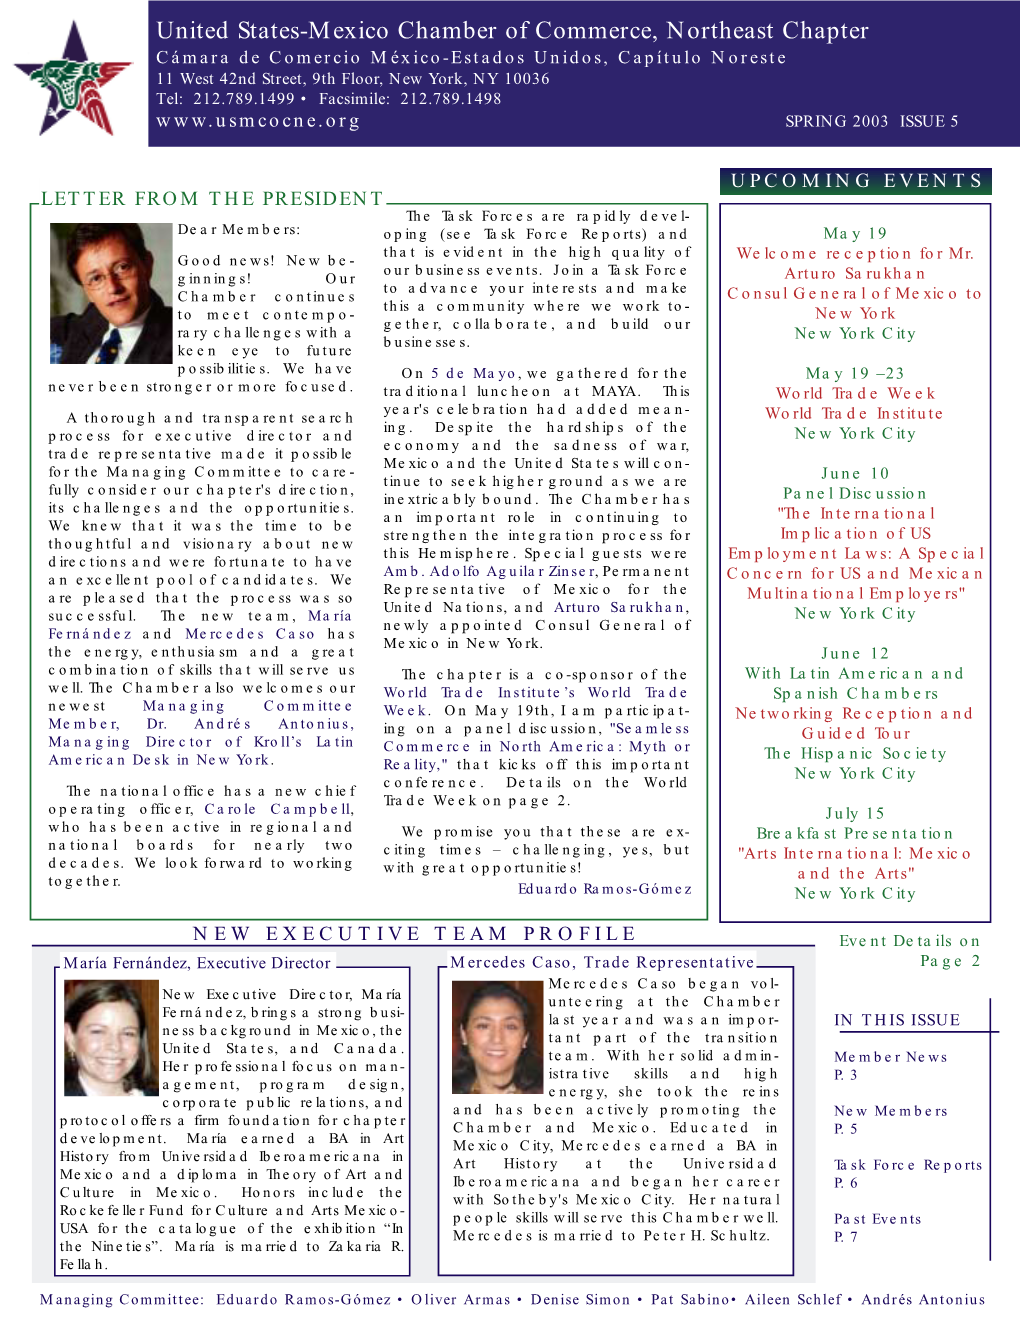 Spring 2003 Issue 5